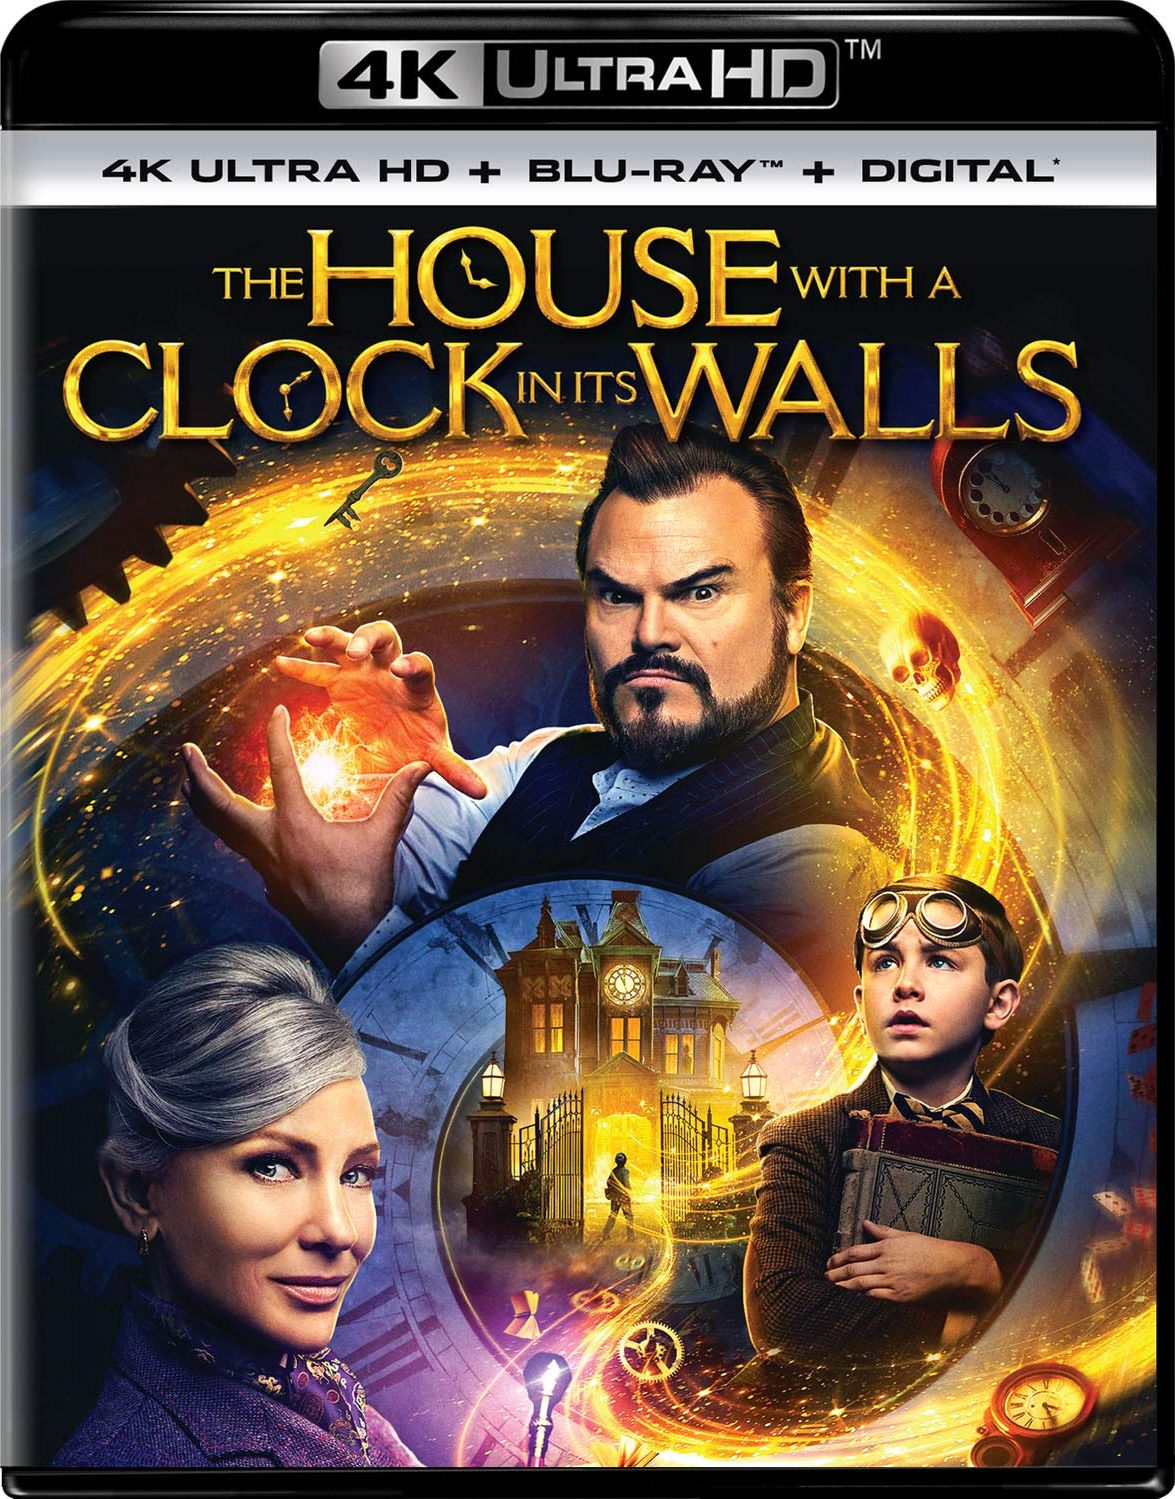 The House with a Clock in its Walls DVD Release Date December 18, 2018 - Movies Like The House With A Clock In Its Walls